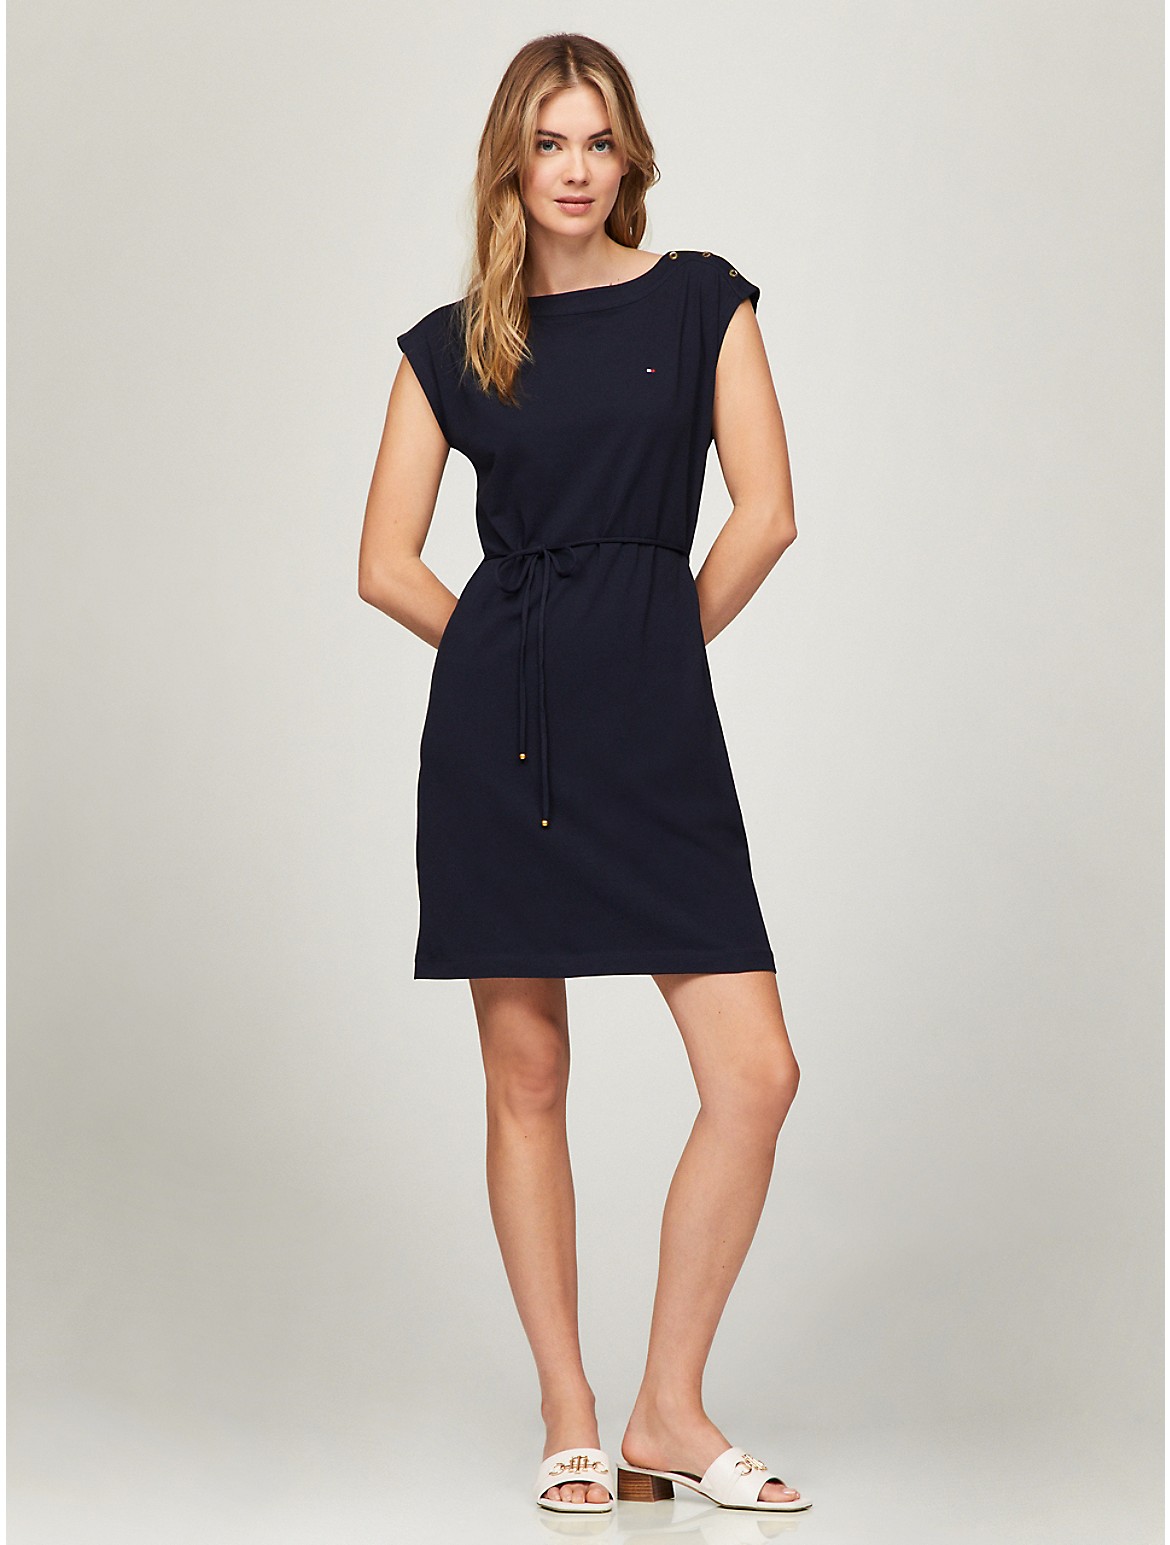 Tommy Hilfiger Women's Everyday Solid Dress